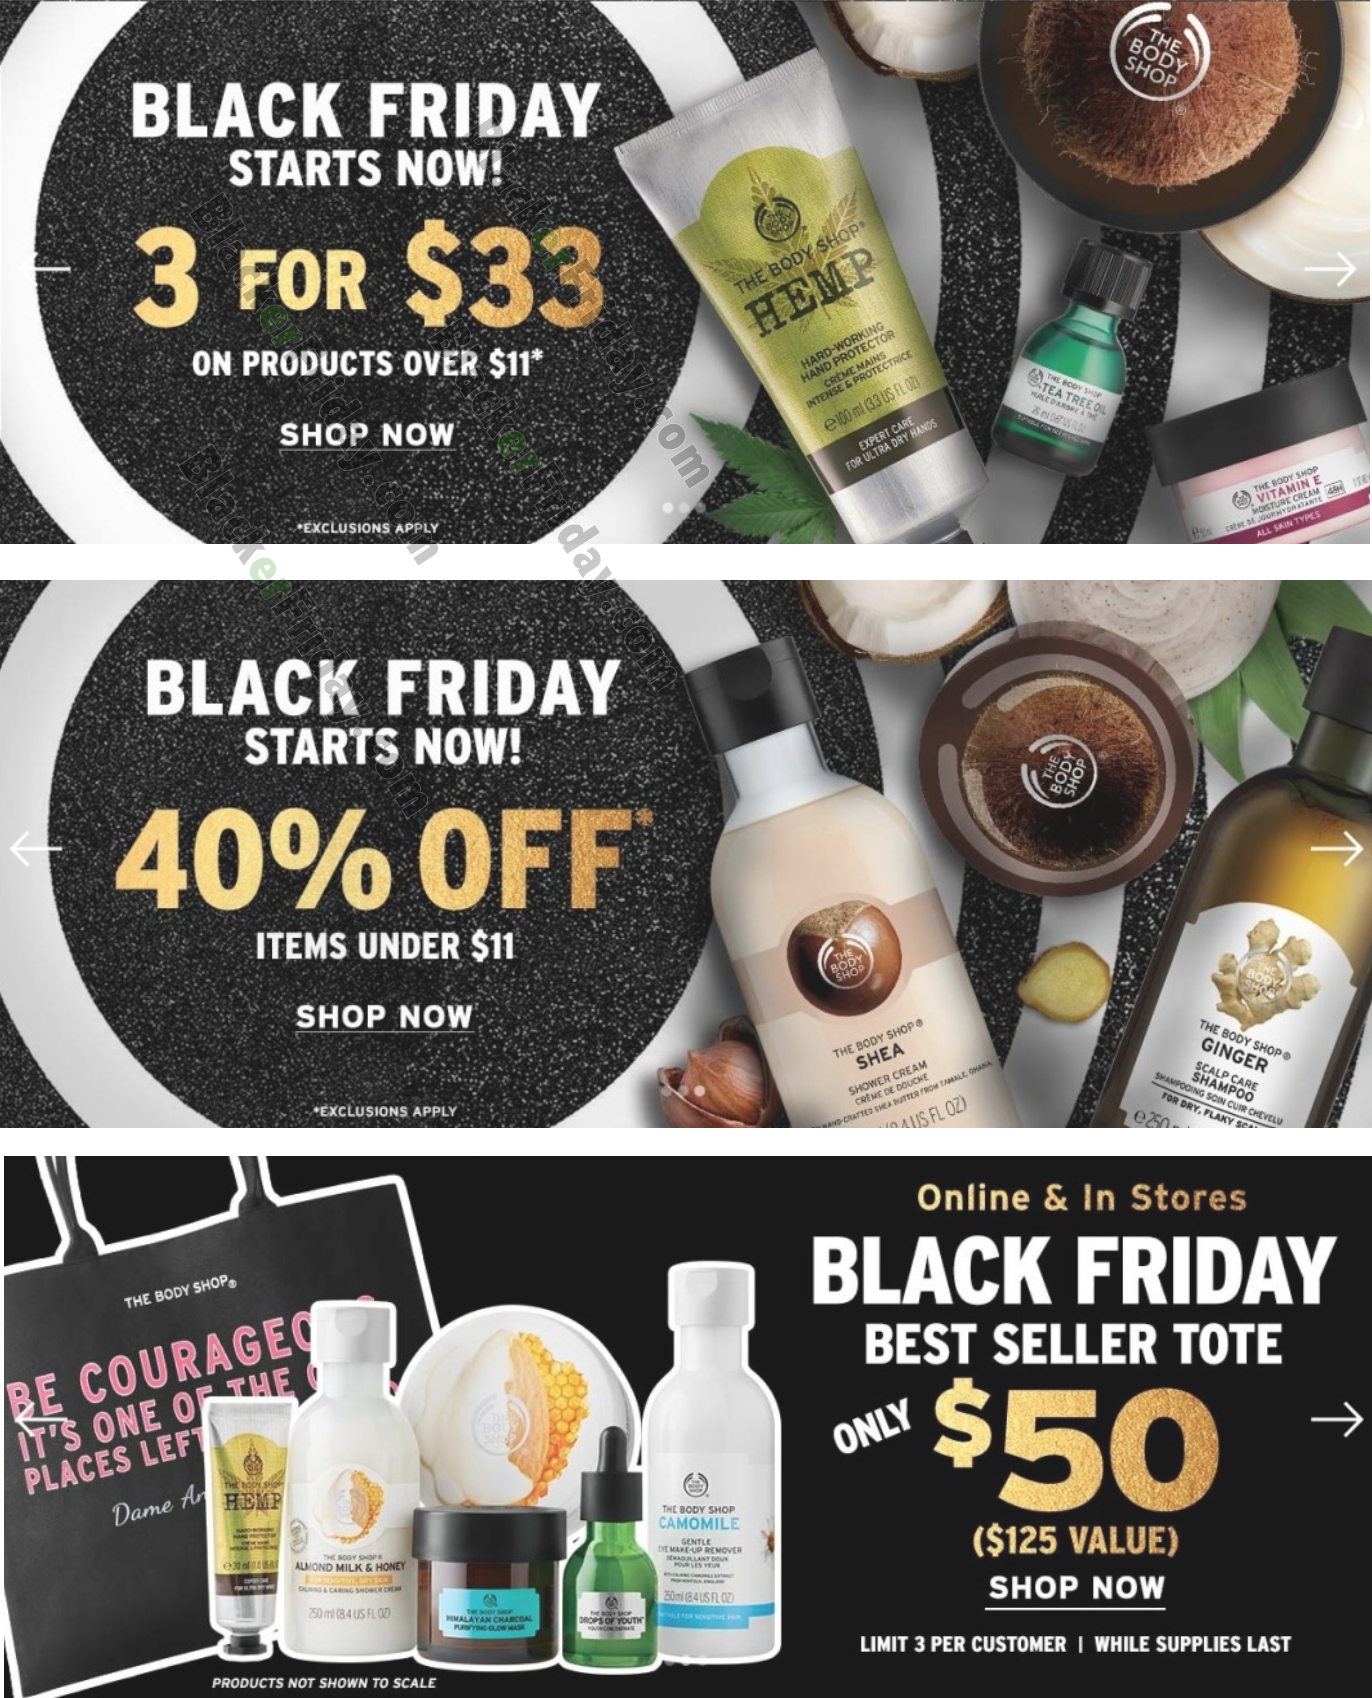 The Body Shop Black Friday 2019 Ad, Sale & Tote Bag Deal - Blacker Friday